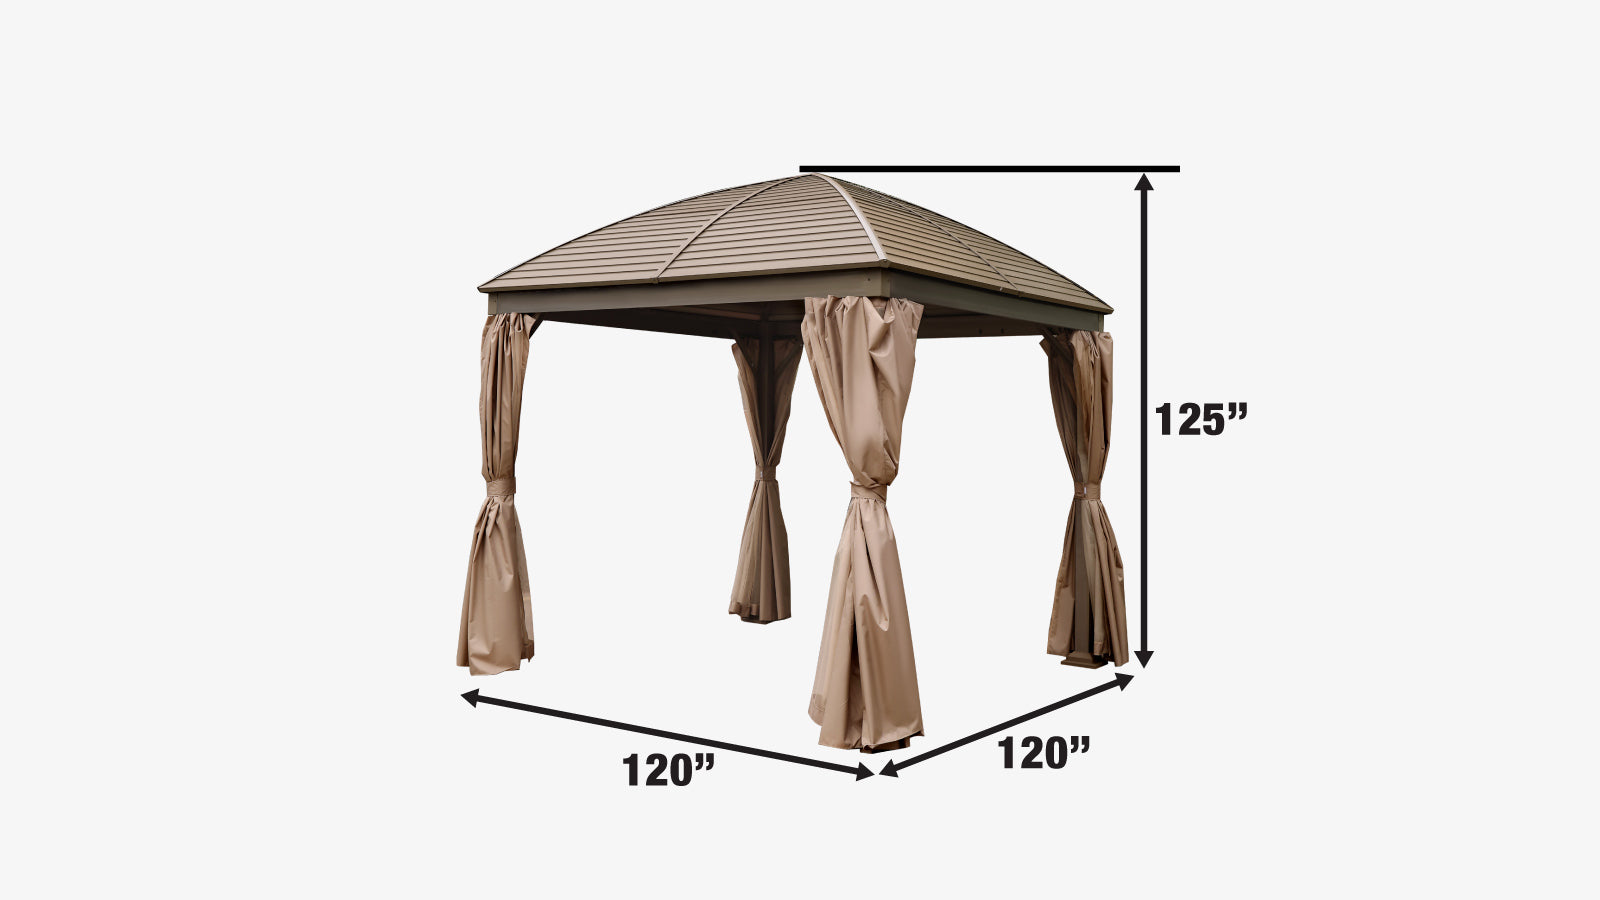 TMG Industrial 10’ x 10’ Hardtop Curved Steel Roof Patio Gazebo, Mosquito Nets & Curtains Included, TMG-LGZ10-specifications-image